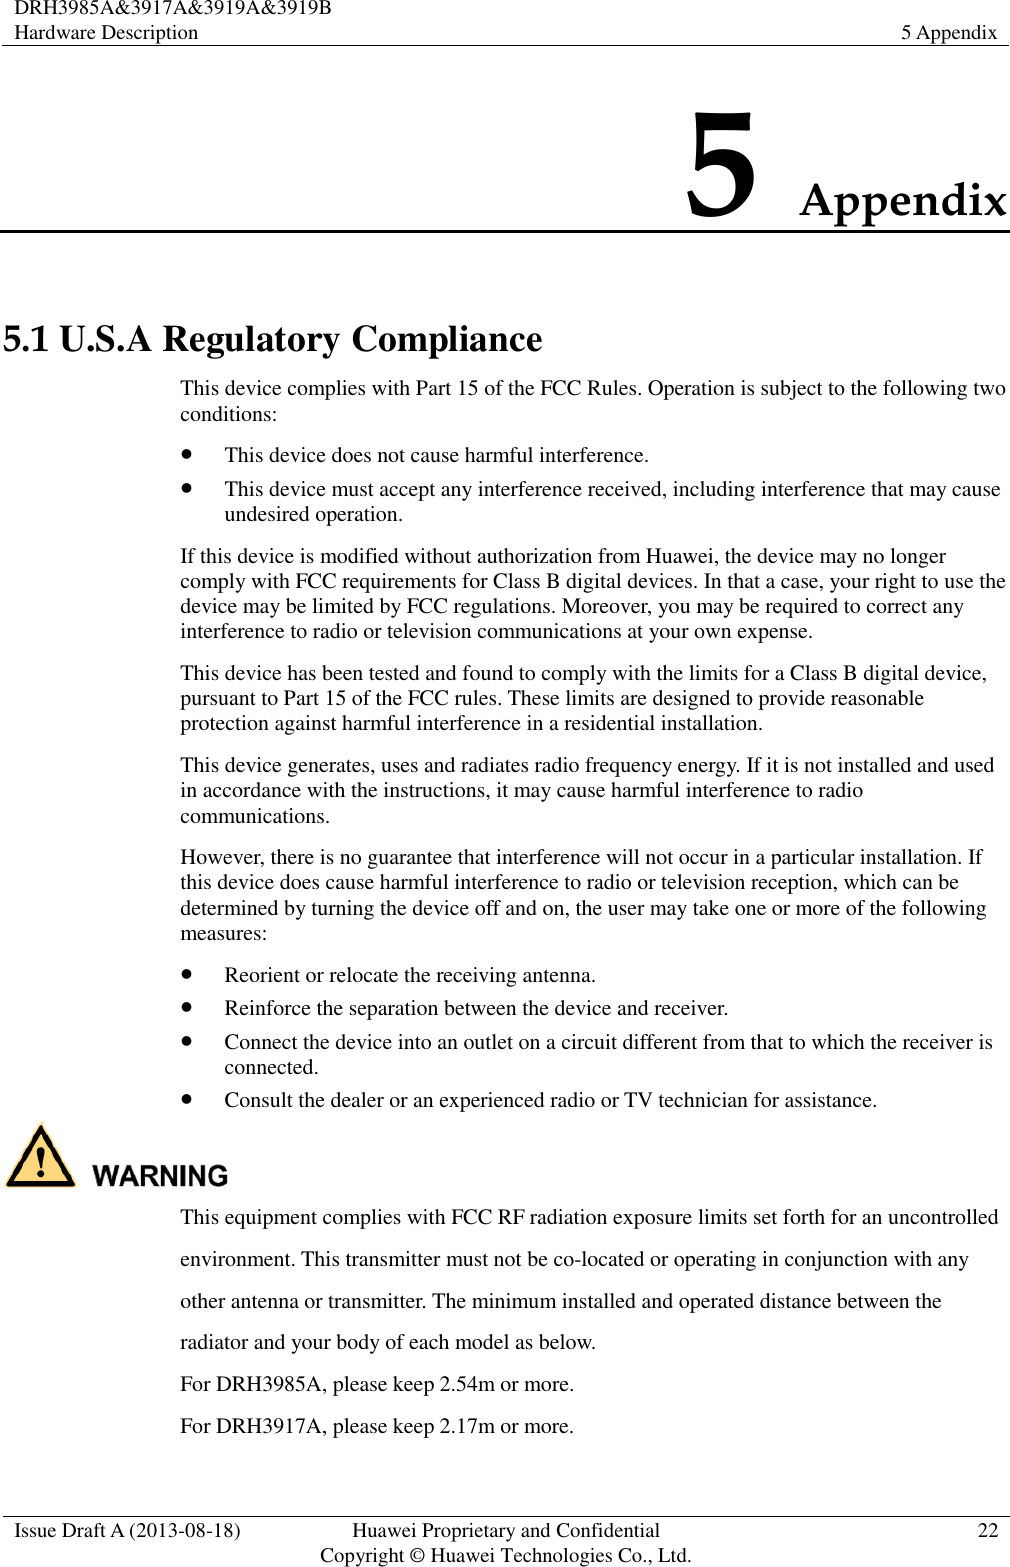 DRH3985A&amp;3917A&amp;3919A&amp;3919B Hardware Description 5 Appendix  Issue Draft A (2013-08-18) Huawei Proprietary and Confidential                                     Copyright © Huawei Technologies Co., Ltd. 22  5 Appendix 5.1 U.S.A Regulatory Compliance This device complies with Part 15 of the FCC Rules. Operation is subject to the following two conditions:  This device does not cause harmful interference.  This device must accept any interference received, including interference that may cause undesired operation. If this device is modified without authorization from Huawei, the device may no longer comply with FCC requirements for Class B digital devices. In that a case, your right to use the device may be limited by FCC regulations. Moreover, you may be required to correct any interference to radio or television communications at your own expense. This device has been tested and found to comply with the limits for a Class B digital device, pursuant to Part 15 of the FCC rules. These limits are designed to provide reasonable protection against harmful interference in a residential installation. This device generates, uses and radiates radio frequency energy. If it is not installed and used in accordance with the instructions, it may cause harmful interference to radio communications. However, there is no guarantee that interference will not occur in a particular installation. If this device does cause harmful interference to radio or television reception, which can be determined by turning the device off and on, the user may take one or more of the following measures:  Reorient or relocate the receiving antenna.  Reinforce the separation between the device and receiver.  Connect the device into an outlet on a circuit different from that to which the receiver is connected.  Consult the dealer or an experienced radio or TV technician for assistance.  This equipment complies with FCC RF radiation exposure limits set forth for an uncontrolled   environment. This transmitter must not be co-located or operating in conjunction with any other antenna or transmitter. The minimum installed and operated distance between the   radiator and your body of each model as below. For DRH3985A, please keep 2.54m or more.   For DRH3917A, please keep 2.17m or more. 